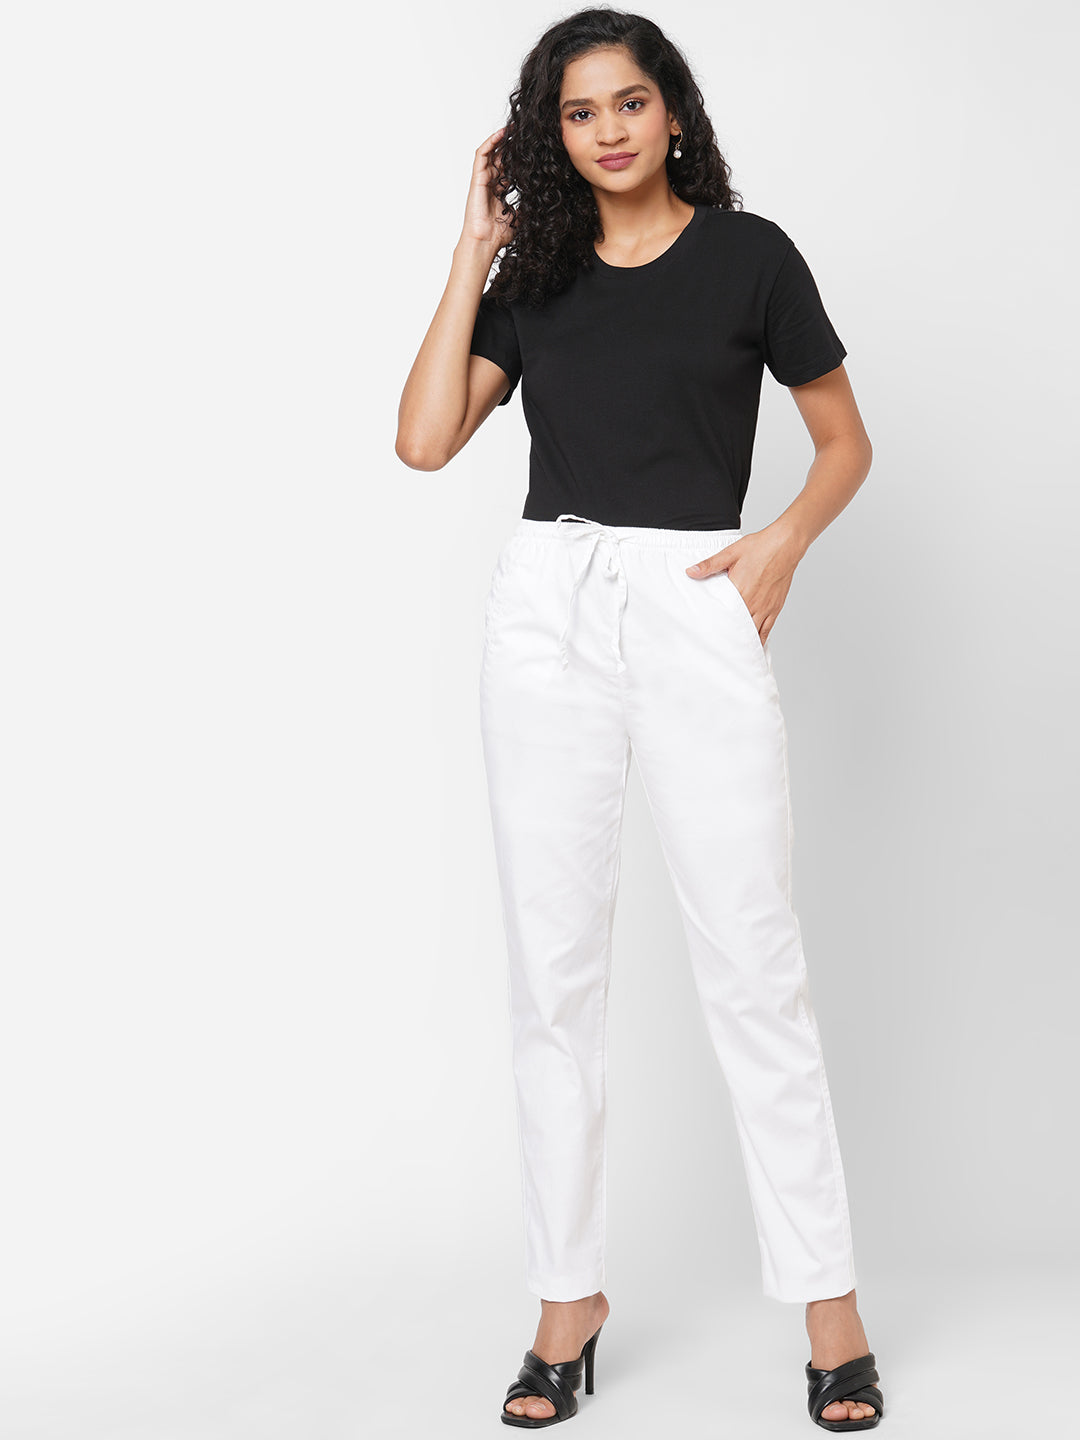 Buy Cotton Lycra Pant for Womens & Girls (White 28-34 Waist) at